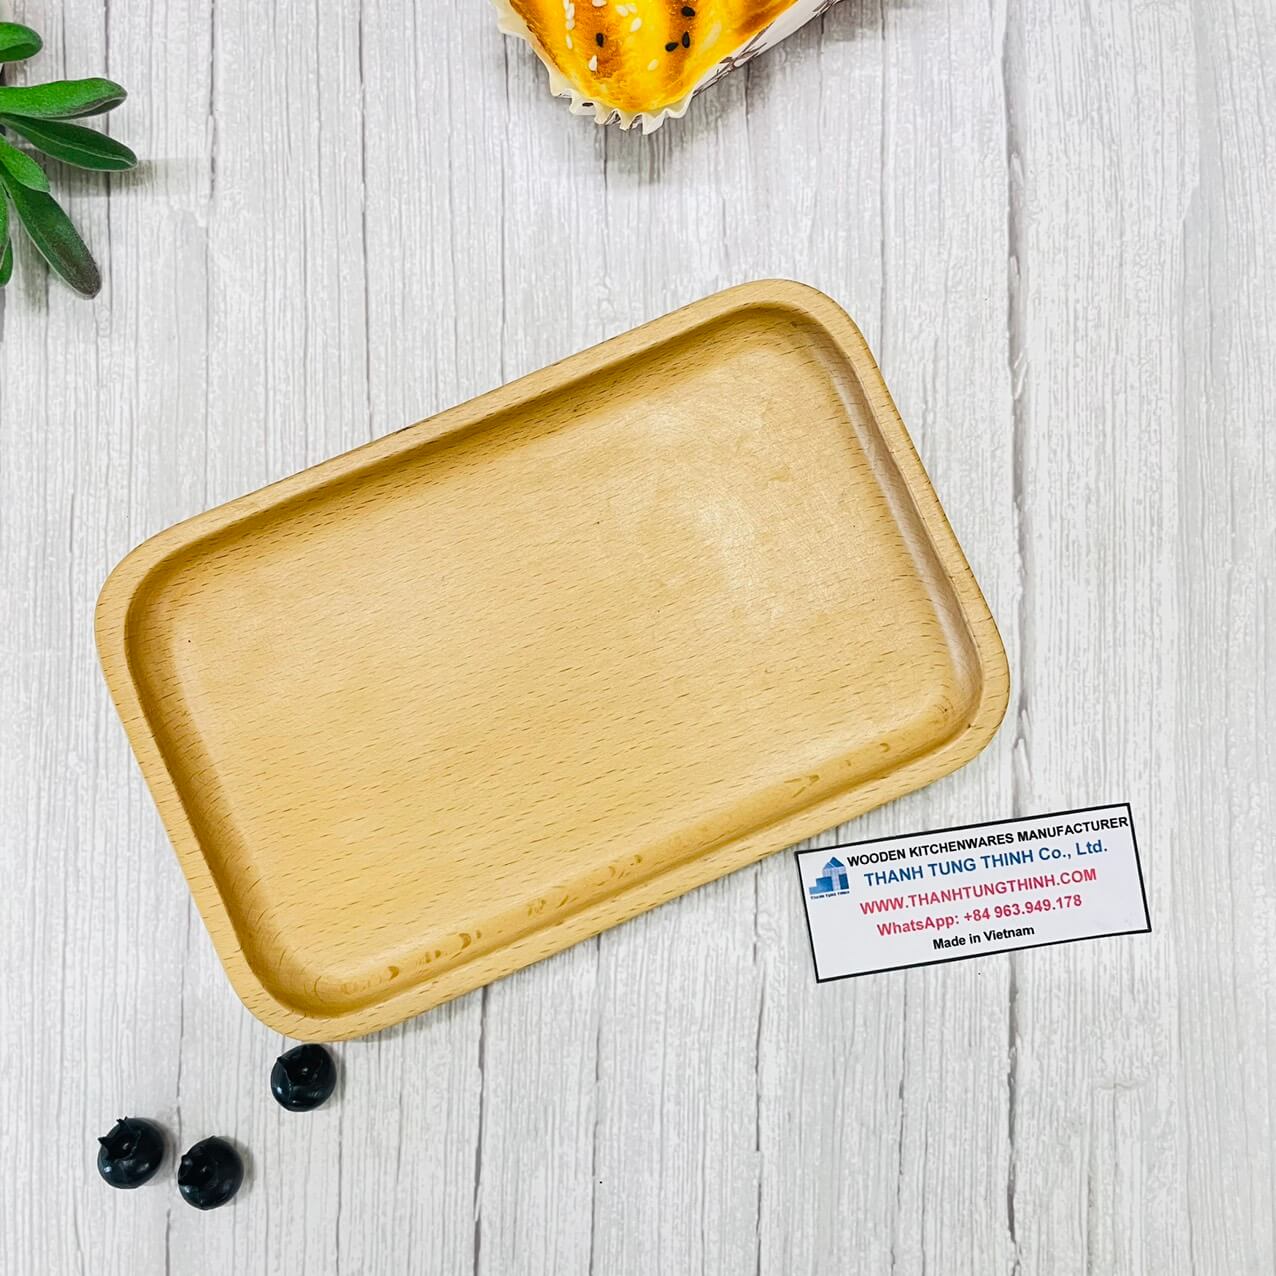 Rounded Edge Rectangle Wooden Tray For Daily Uses